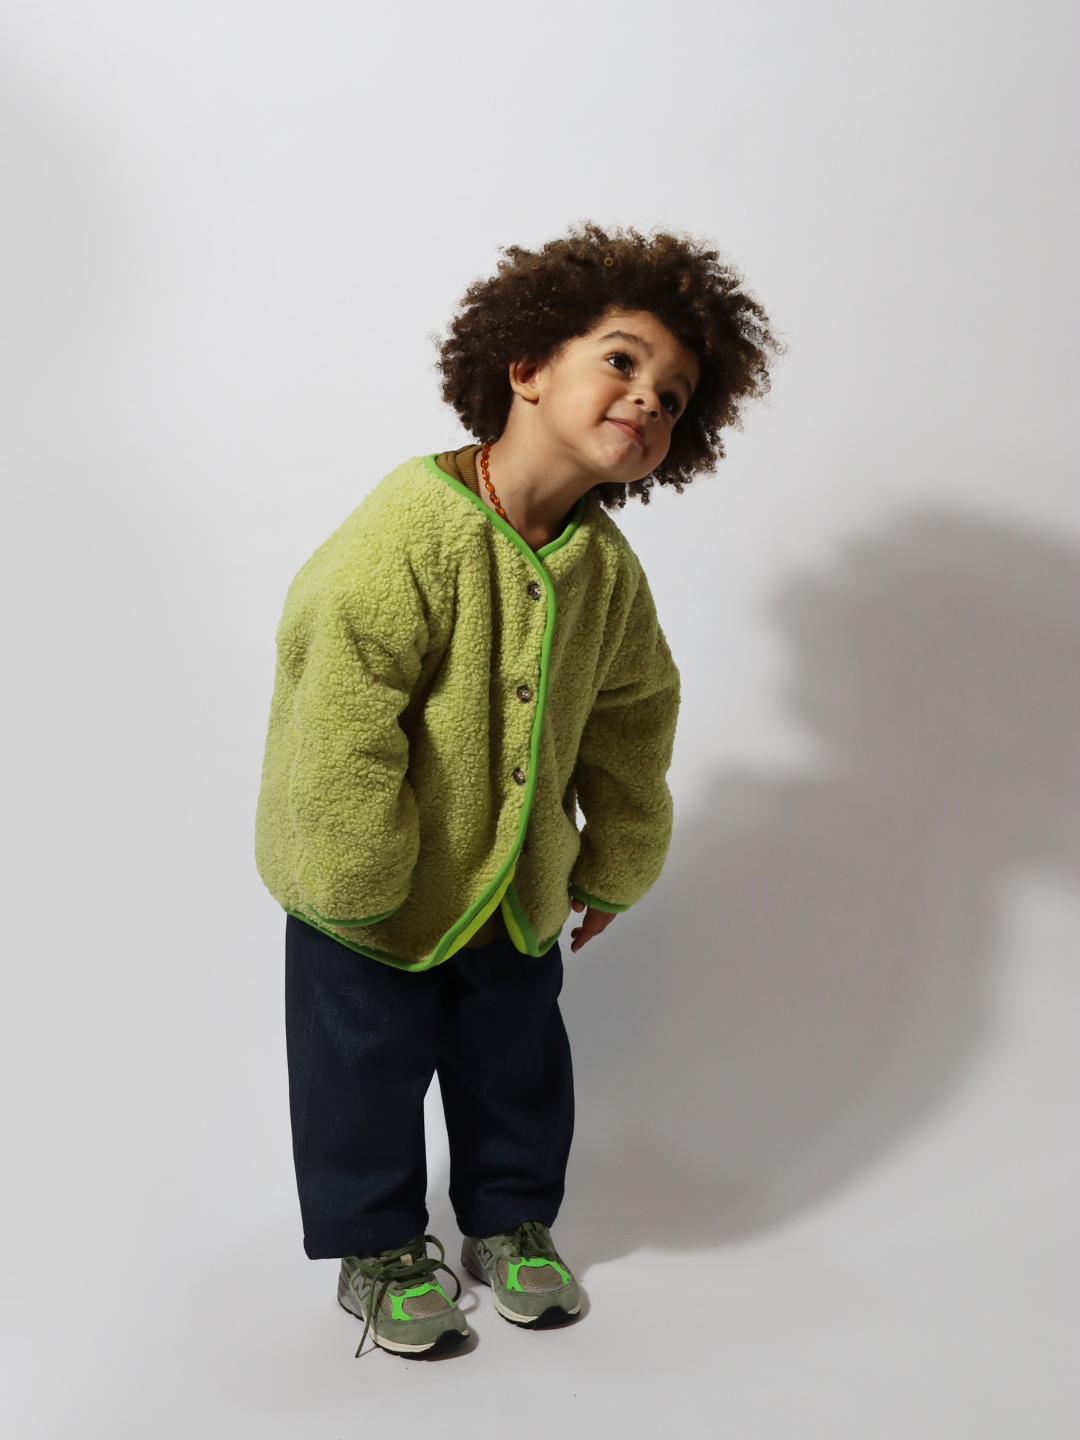 A toddler wearing a light green collarless fleece jacket with four brown buttons, with dark blue pants and green sneakers, standing on a light grey background.